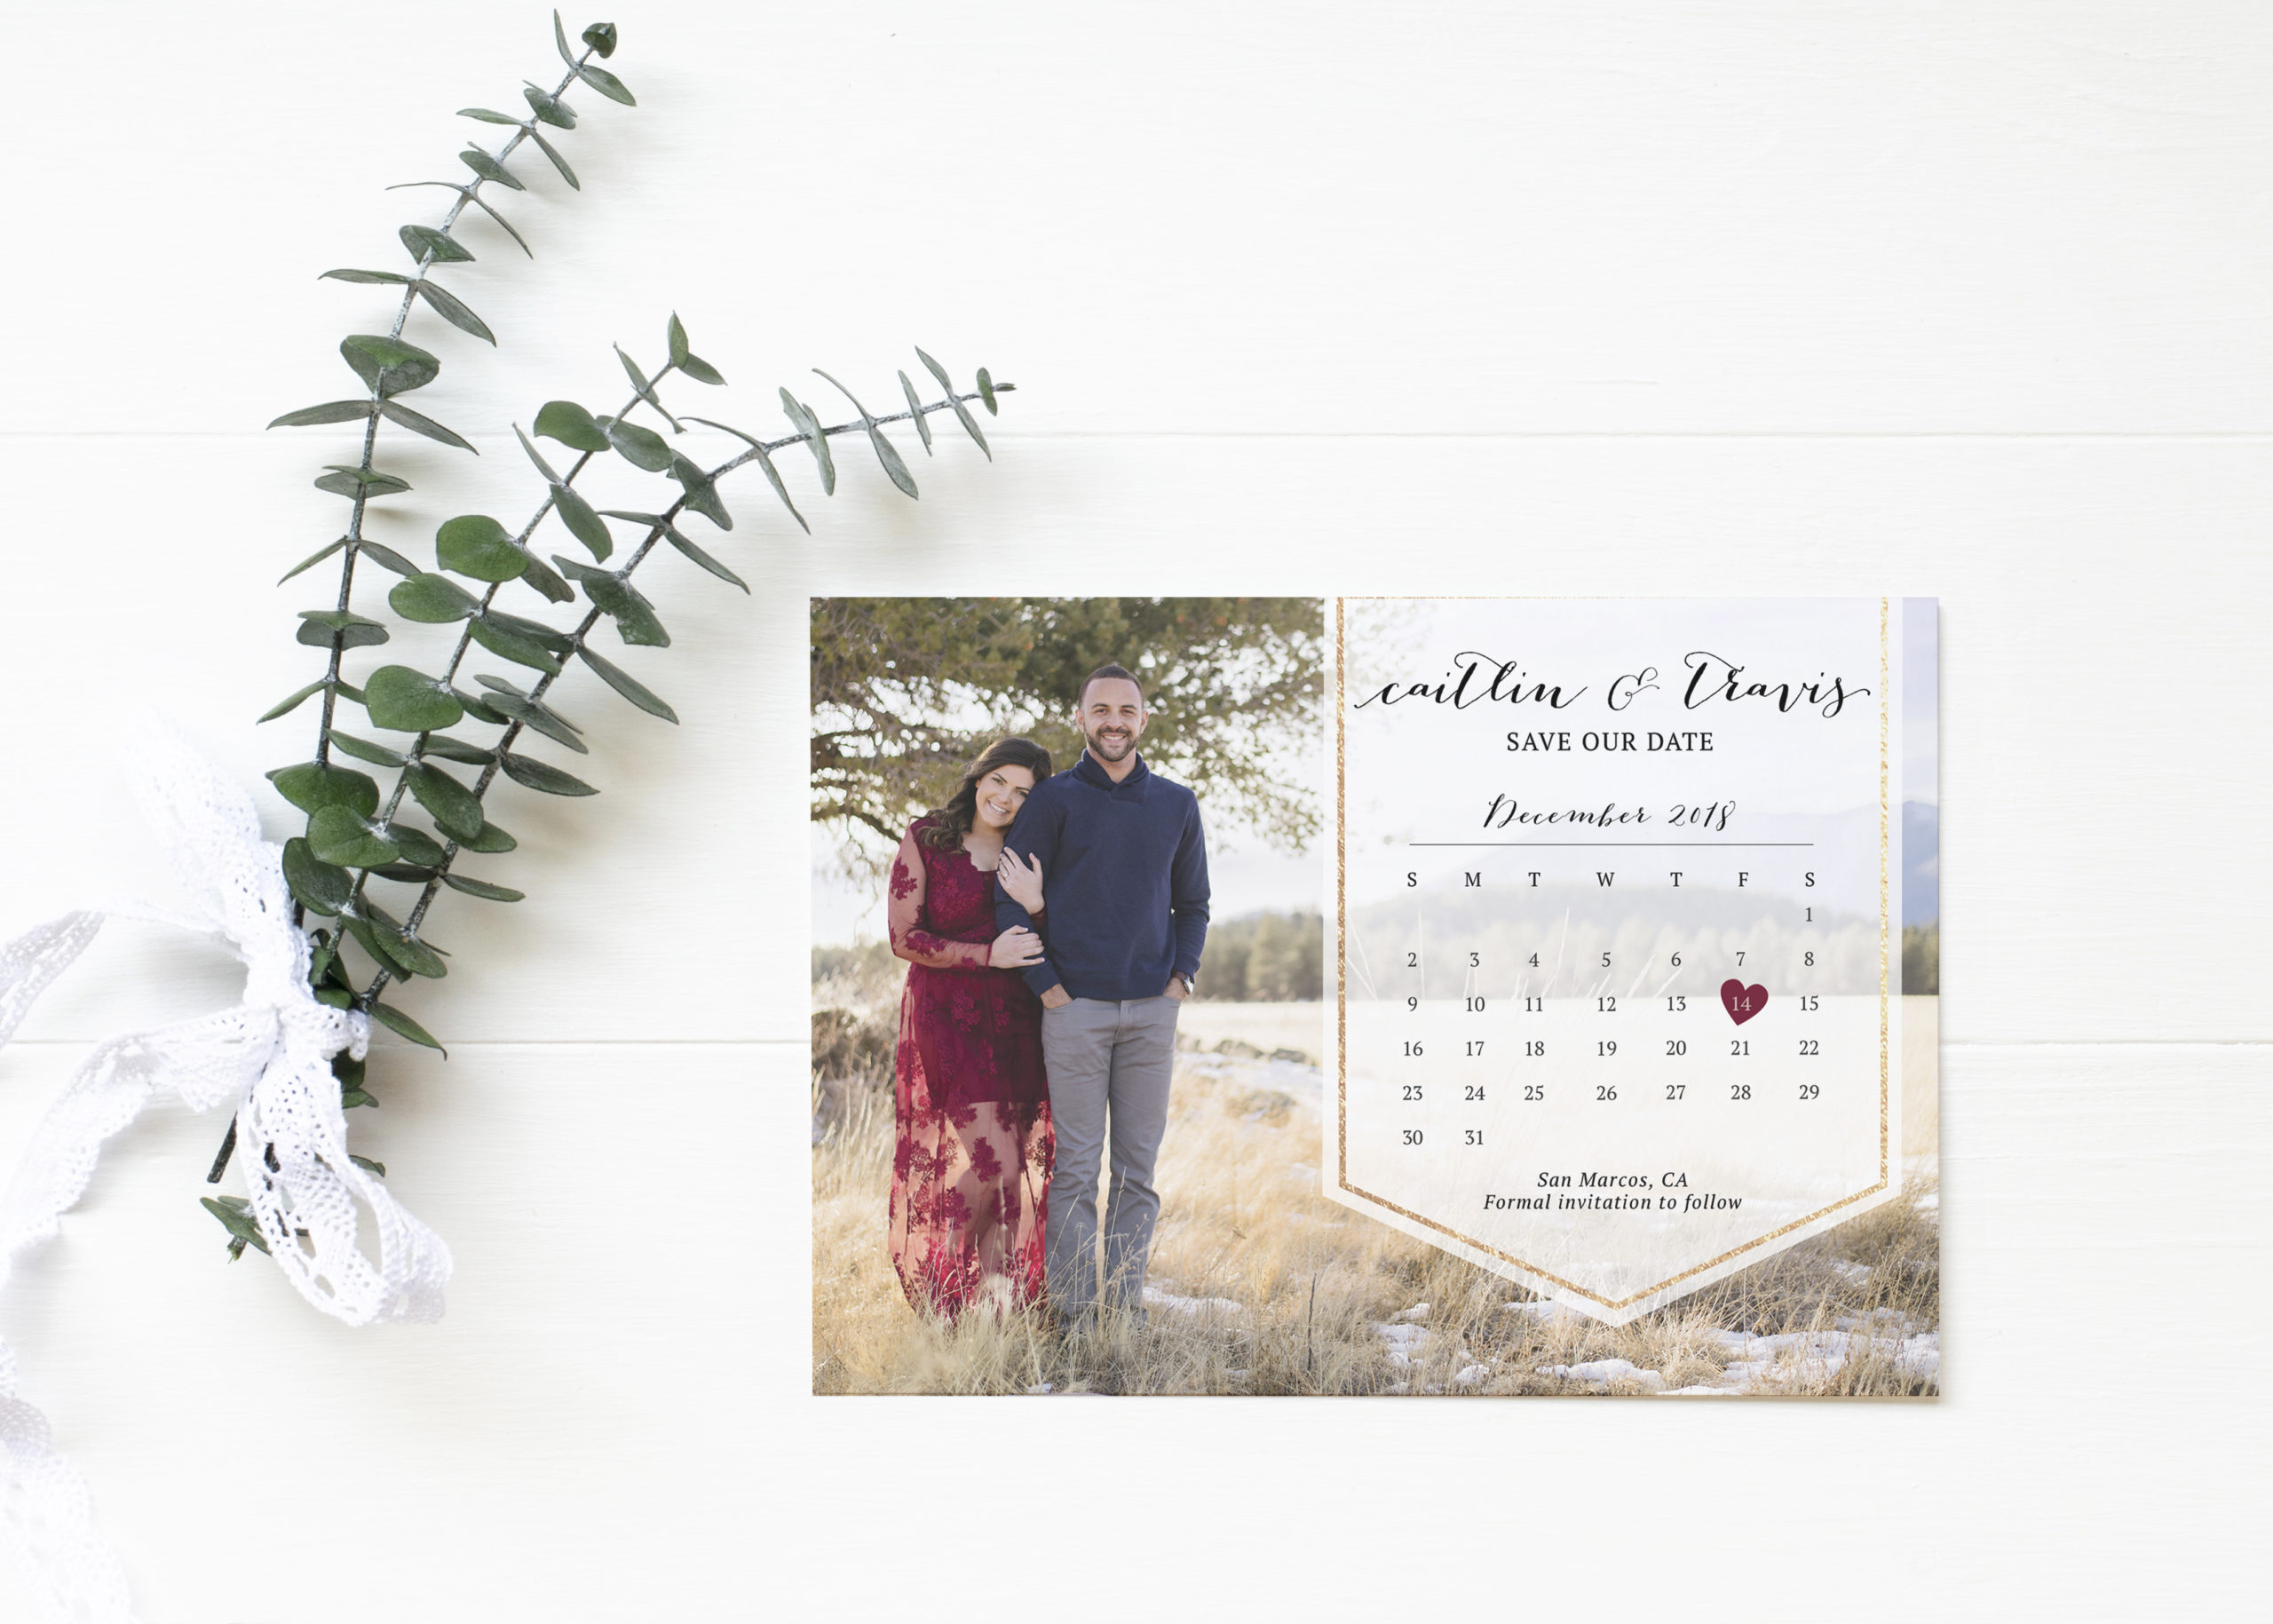 Custom save the date with photo and calendar